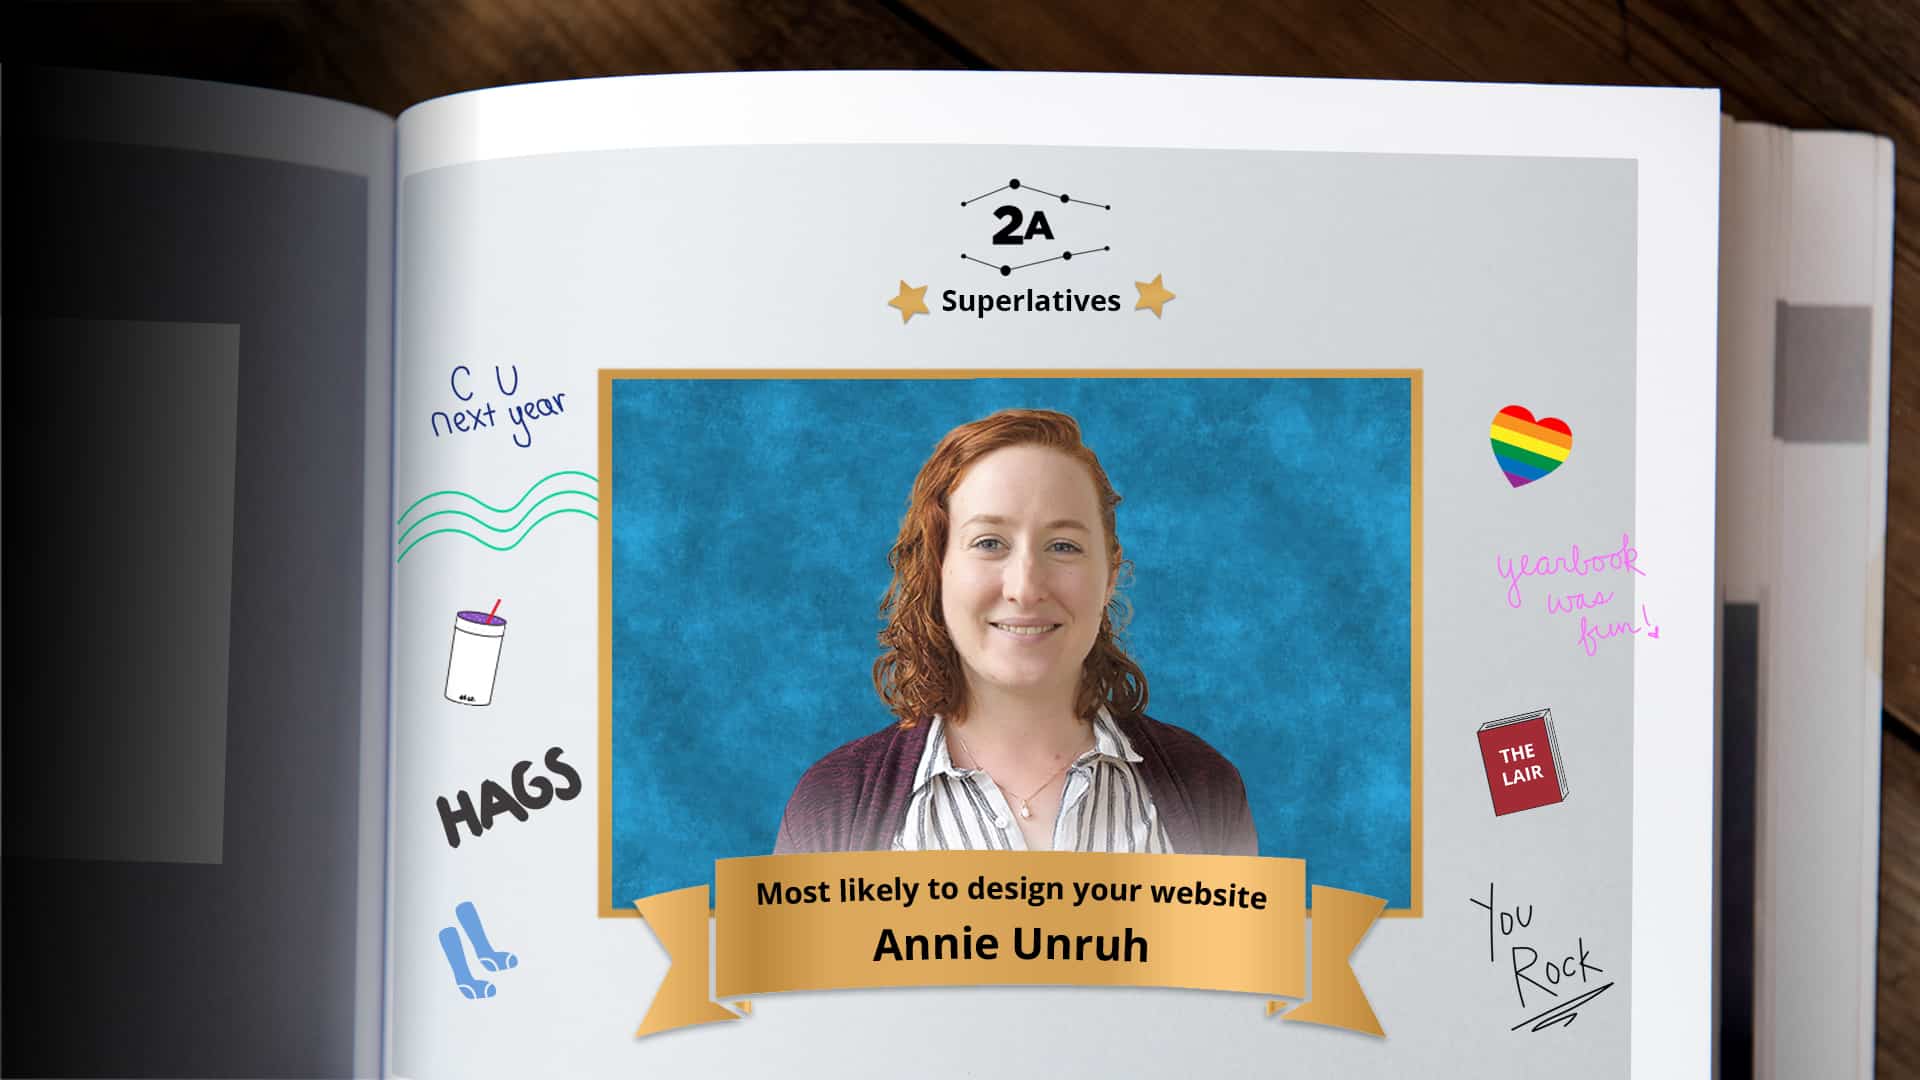 Most likely to design your website? Vote for Annie.